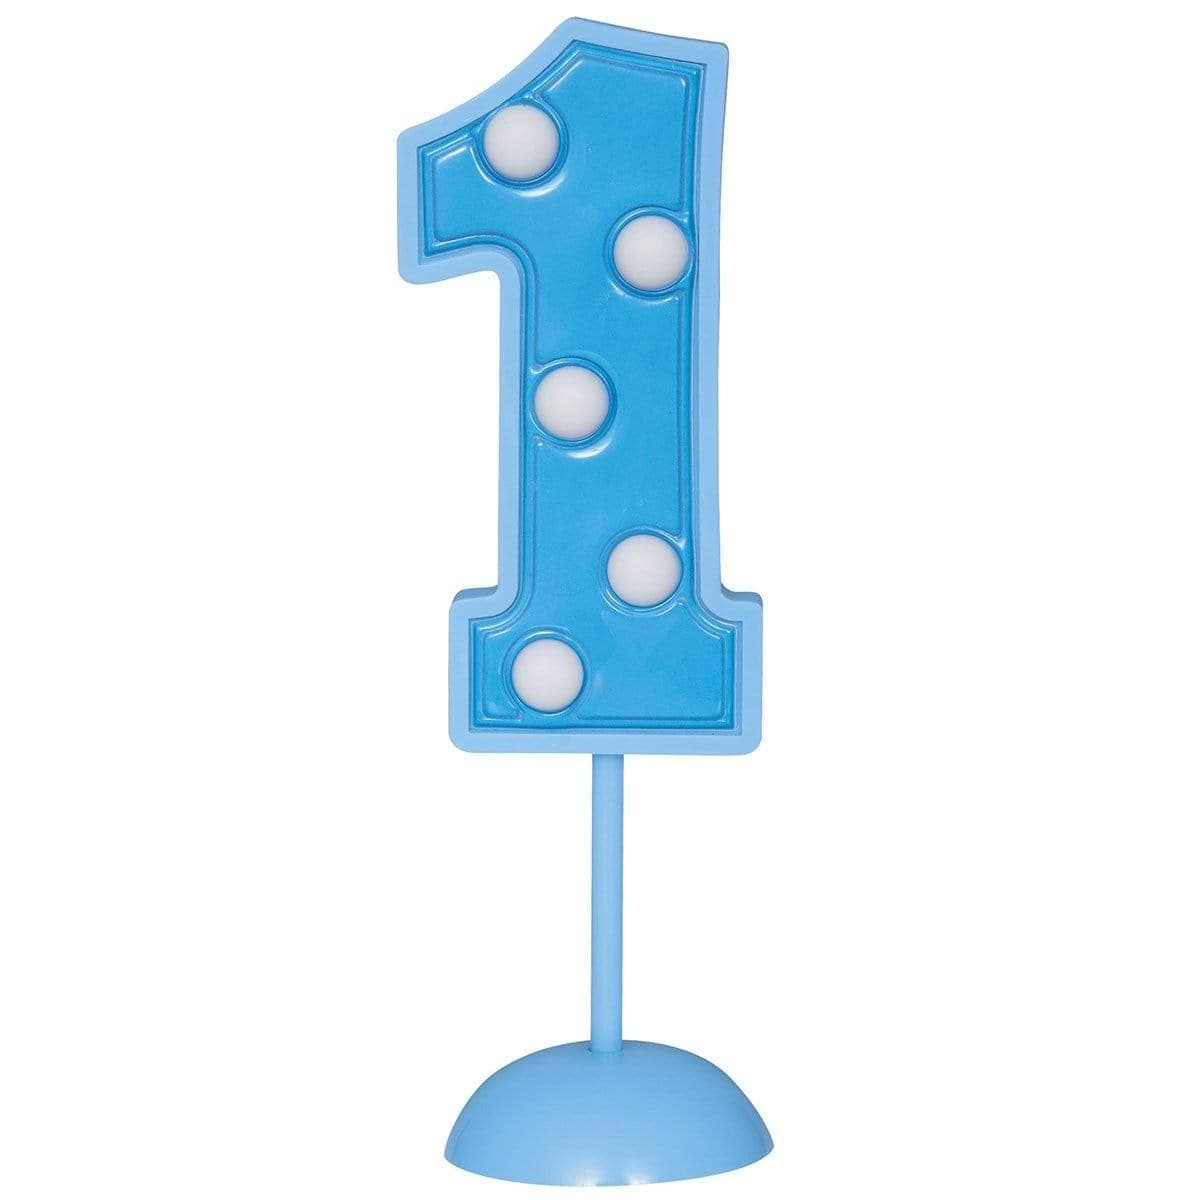 Buy Cake Supplies Flashing Number Deco #1 - Blue sold at Party Expert